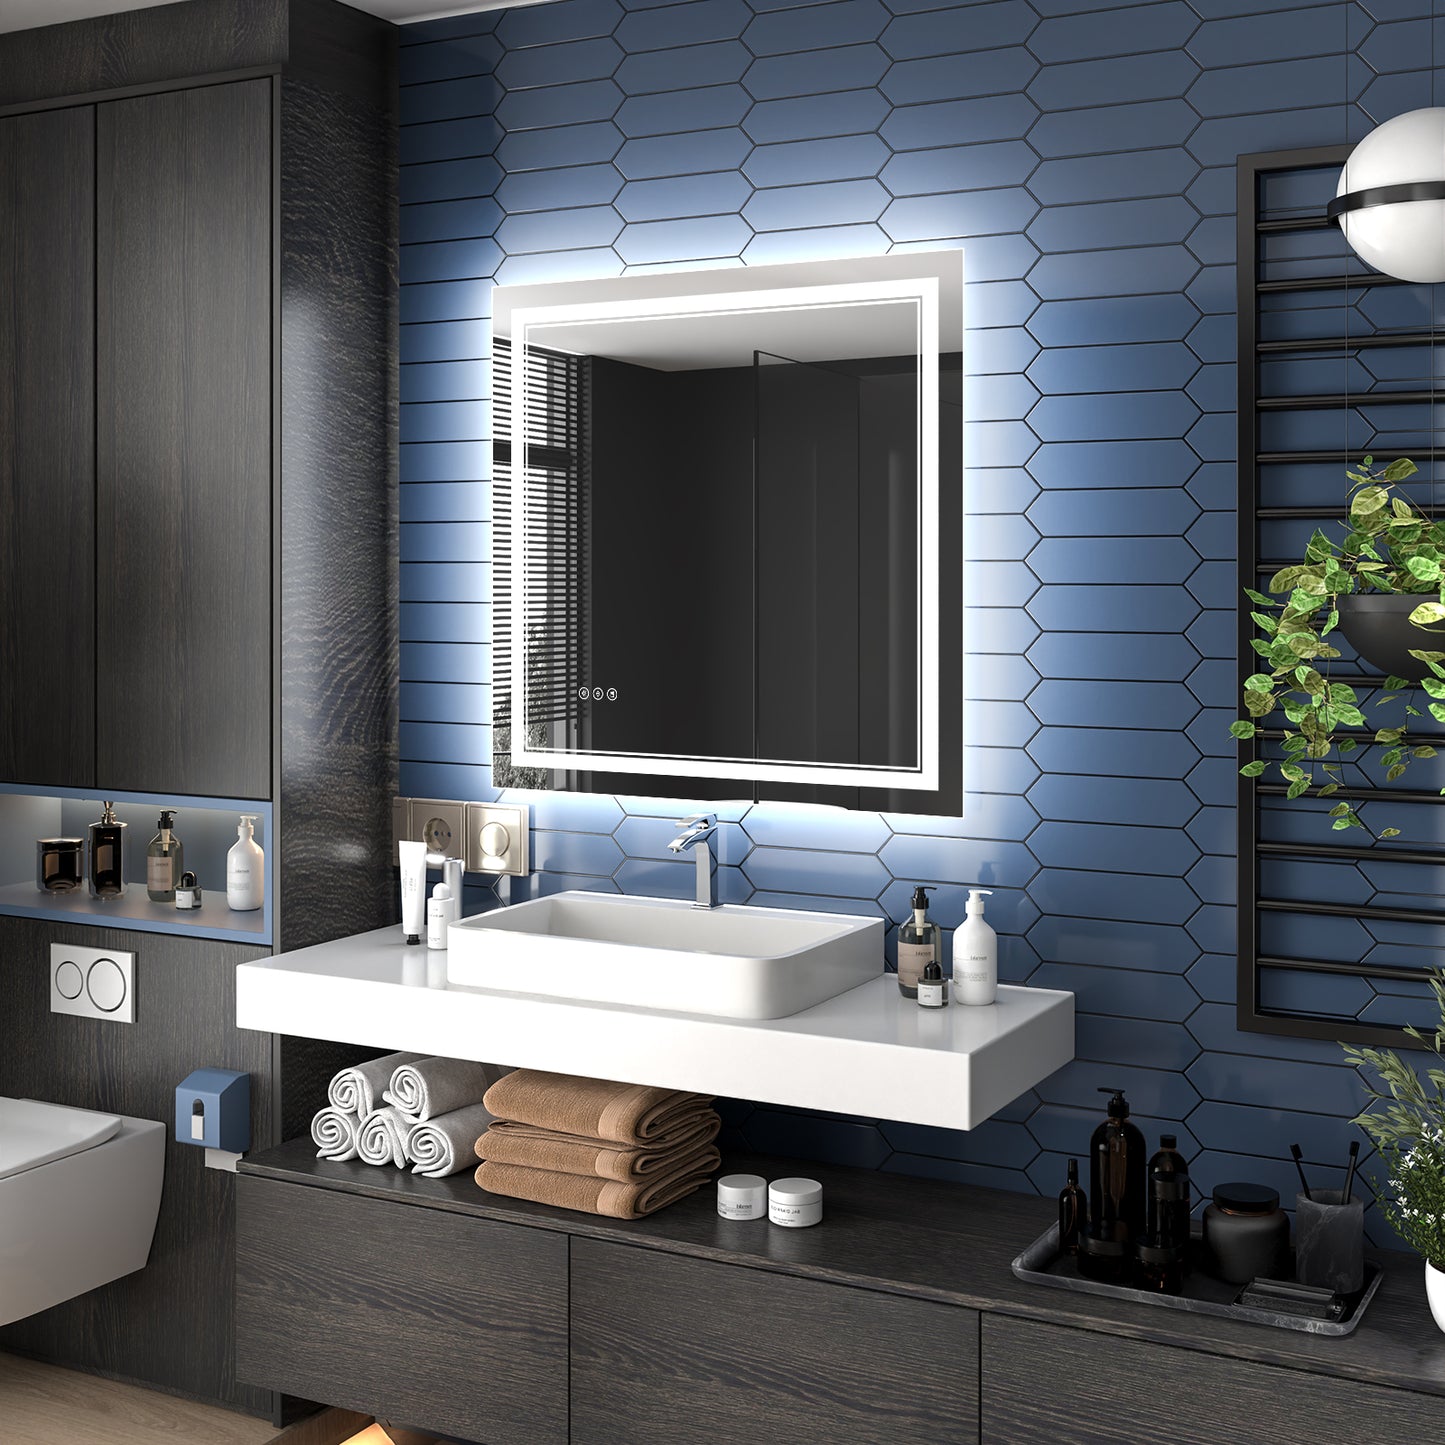 Linea 36" W x 36" H LED Heated Bathroom Mirror,Anti Fog,Dimmable,Front-Lighted and Backlit, Tempered Glass